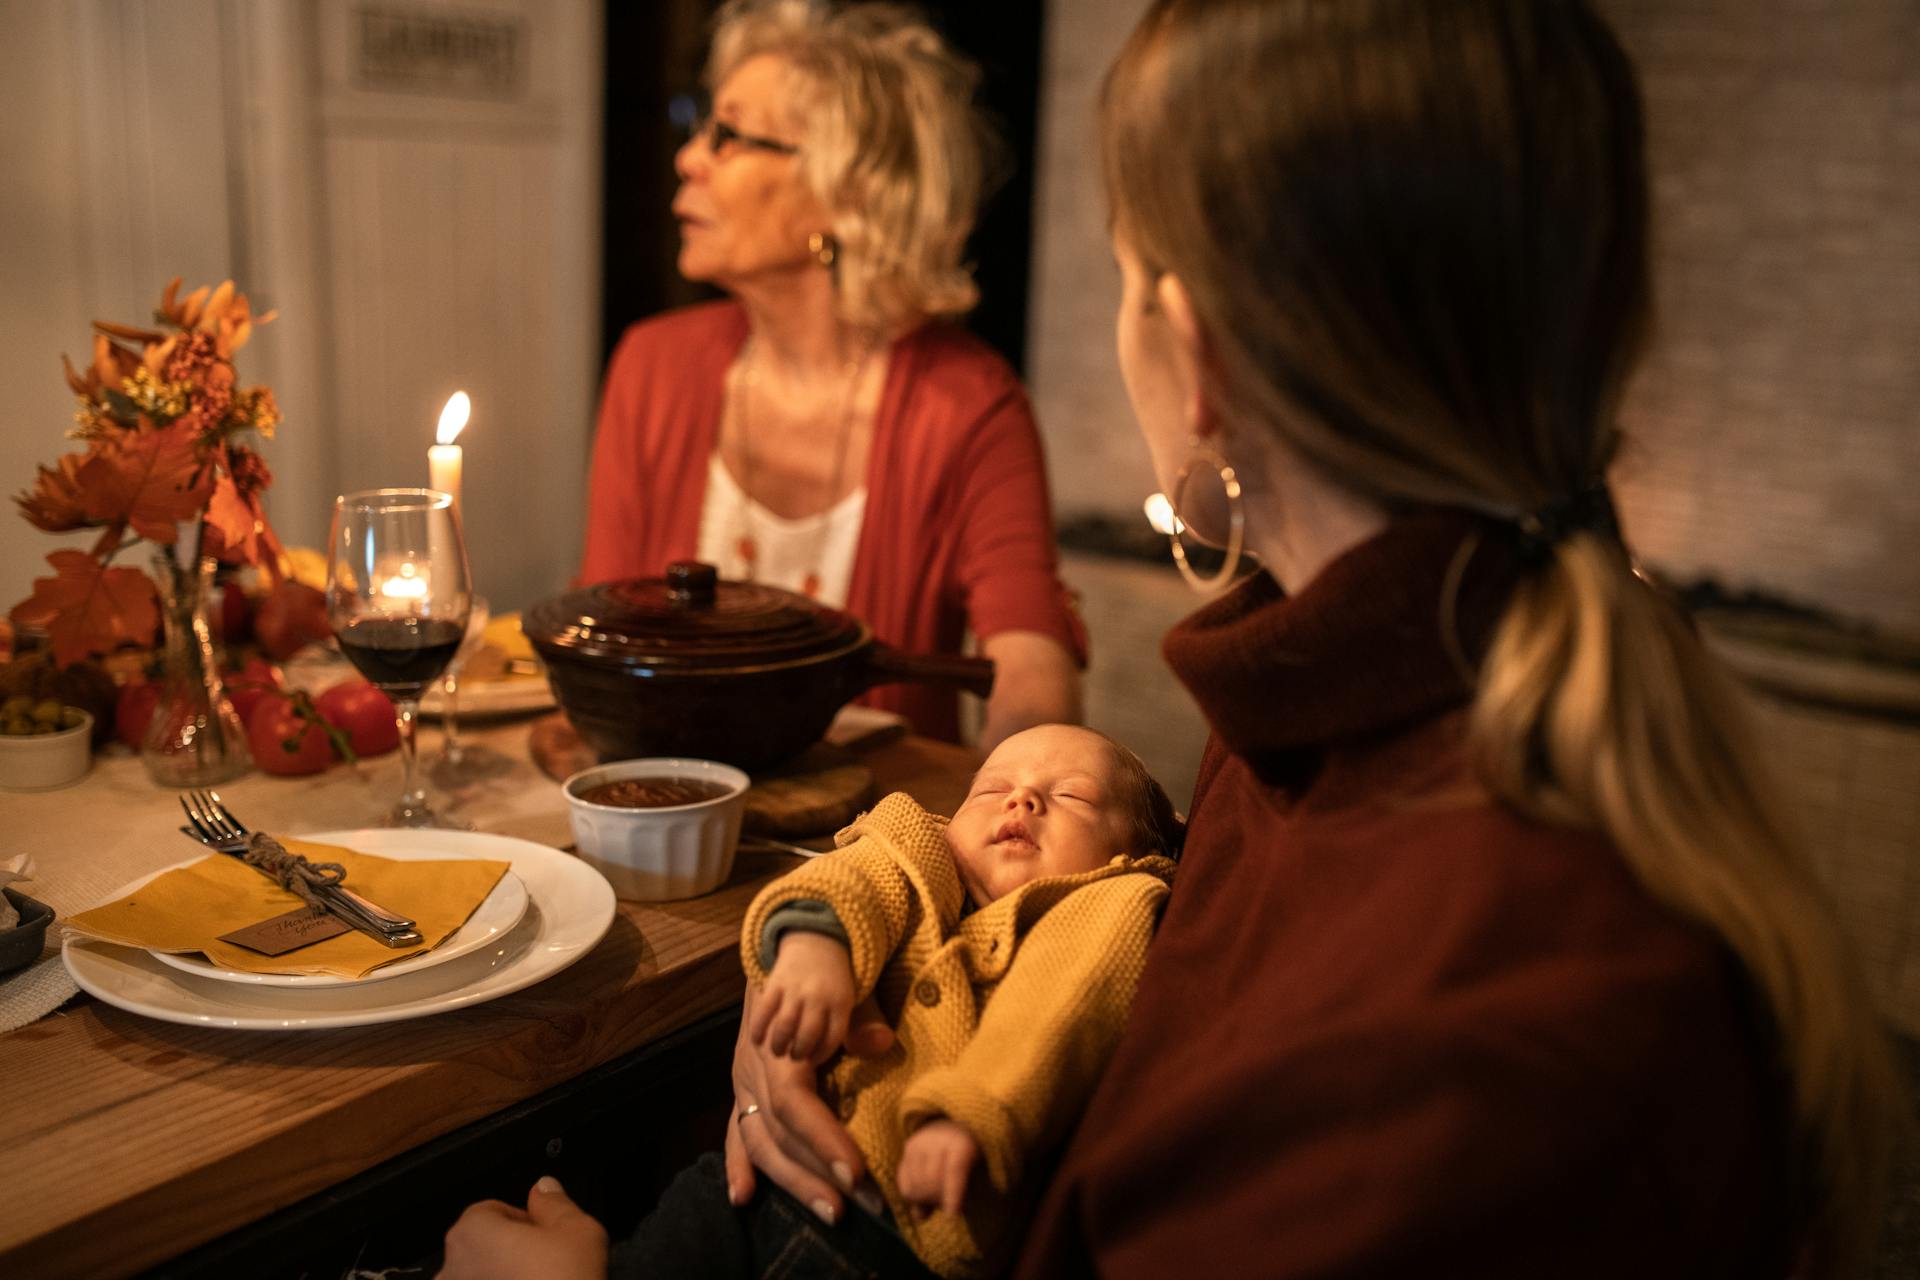 A family sitting at the table | Source: Pexels